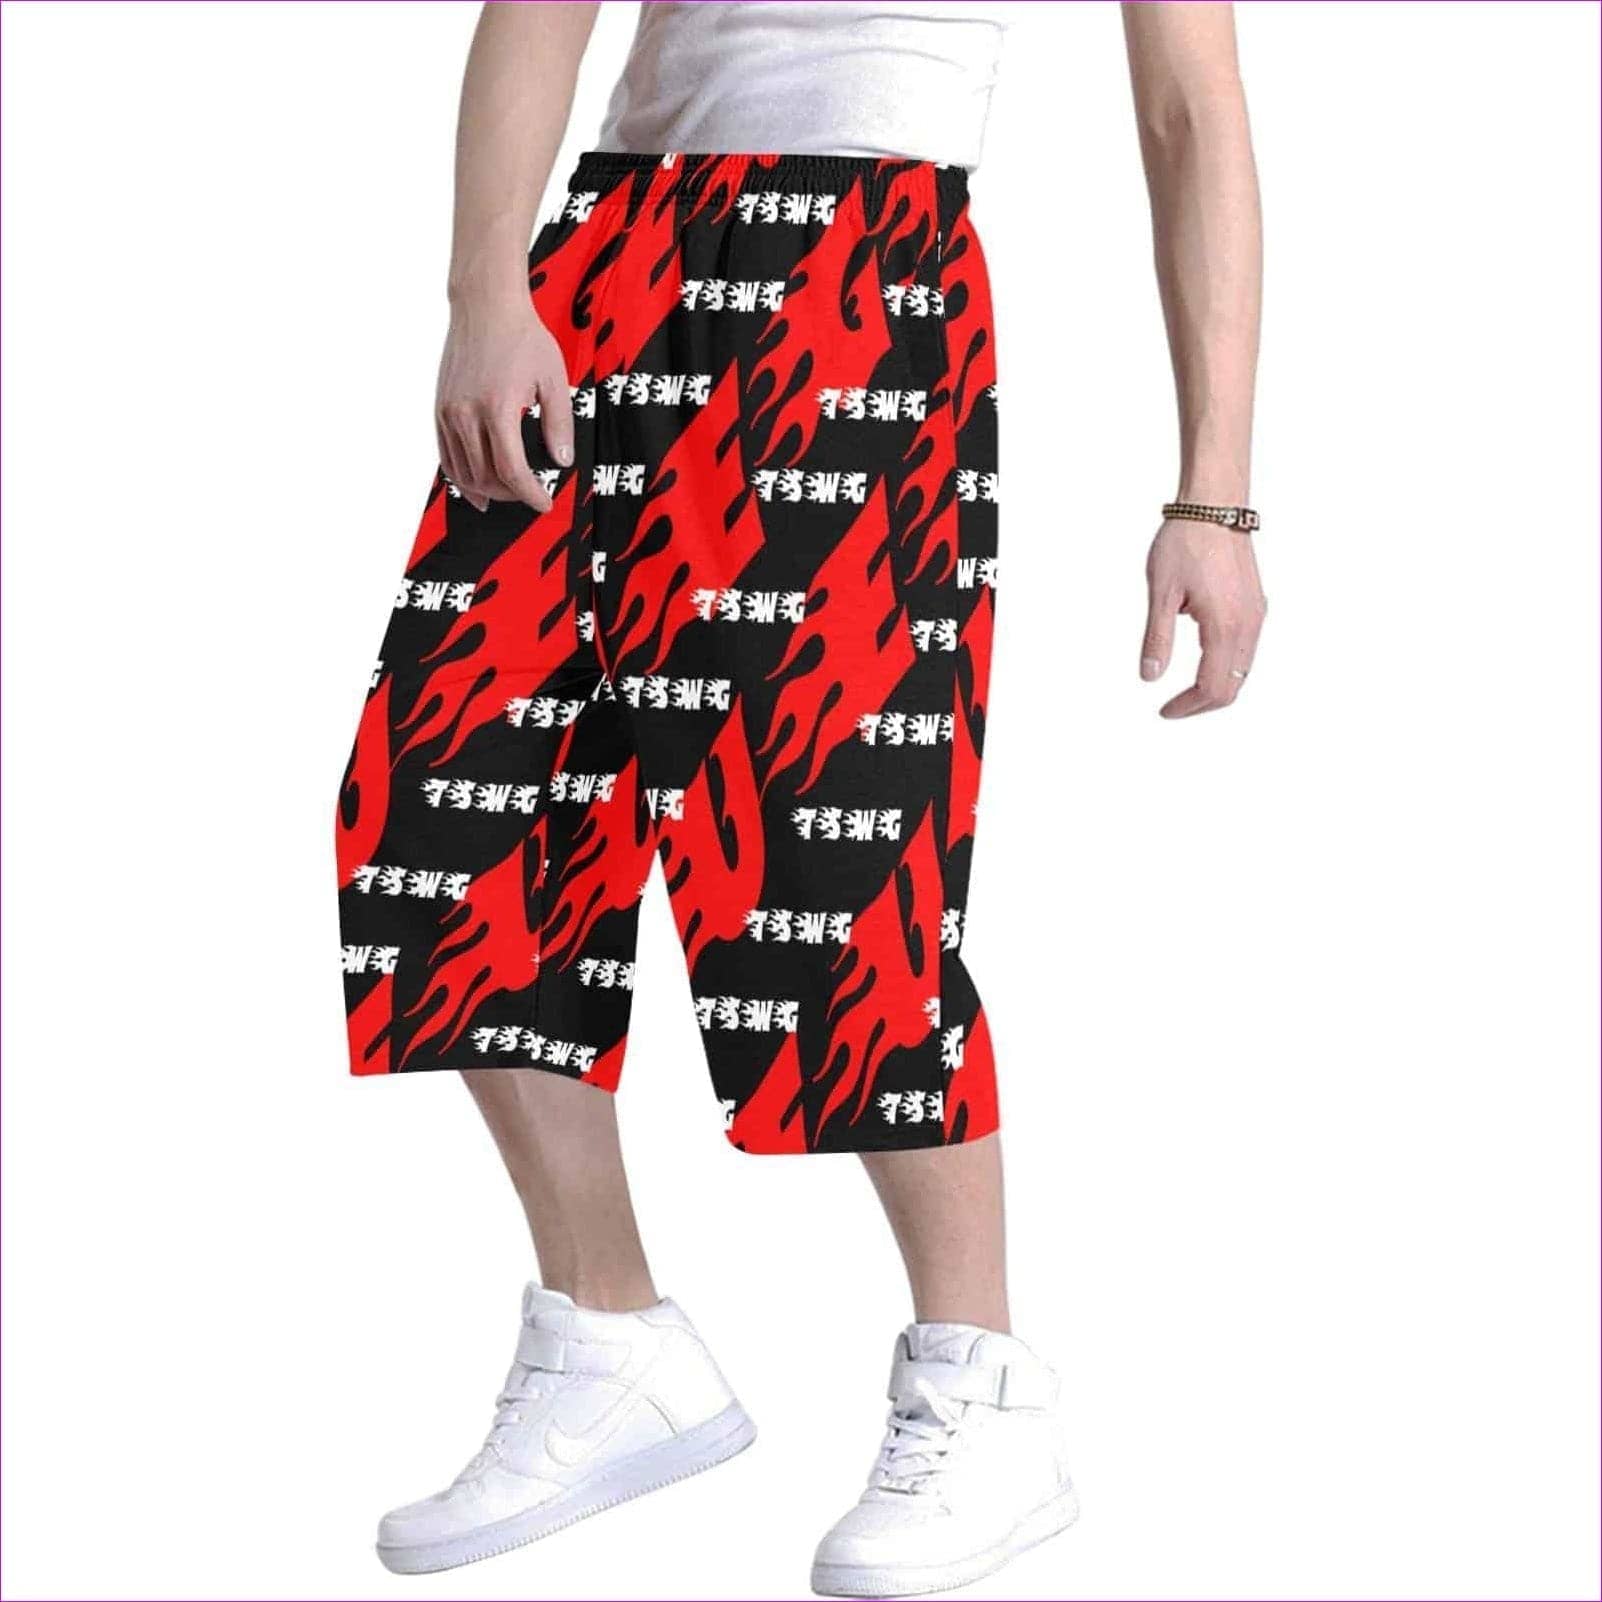 TSWG Fuego Flame 2 Men's All Over Print Baggy Shorts (Model L37) - TSWG Fuego Flame Men's Baggy Shorts - Red - 2 styles - mens shorts at TFC&H Co.